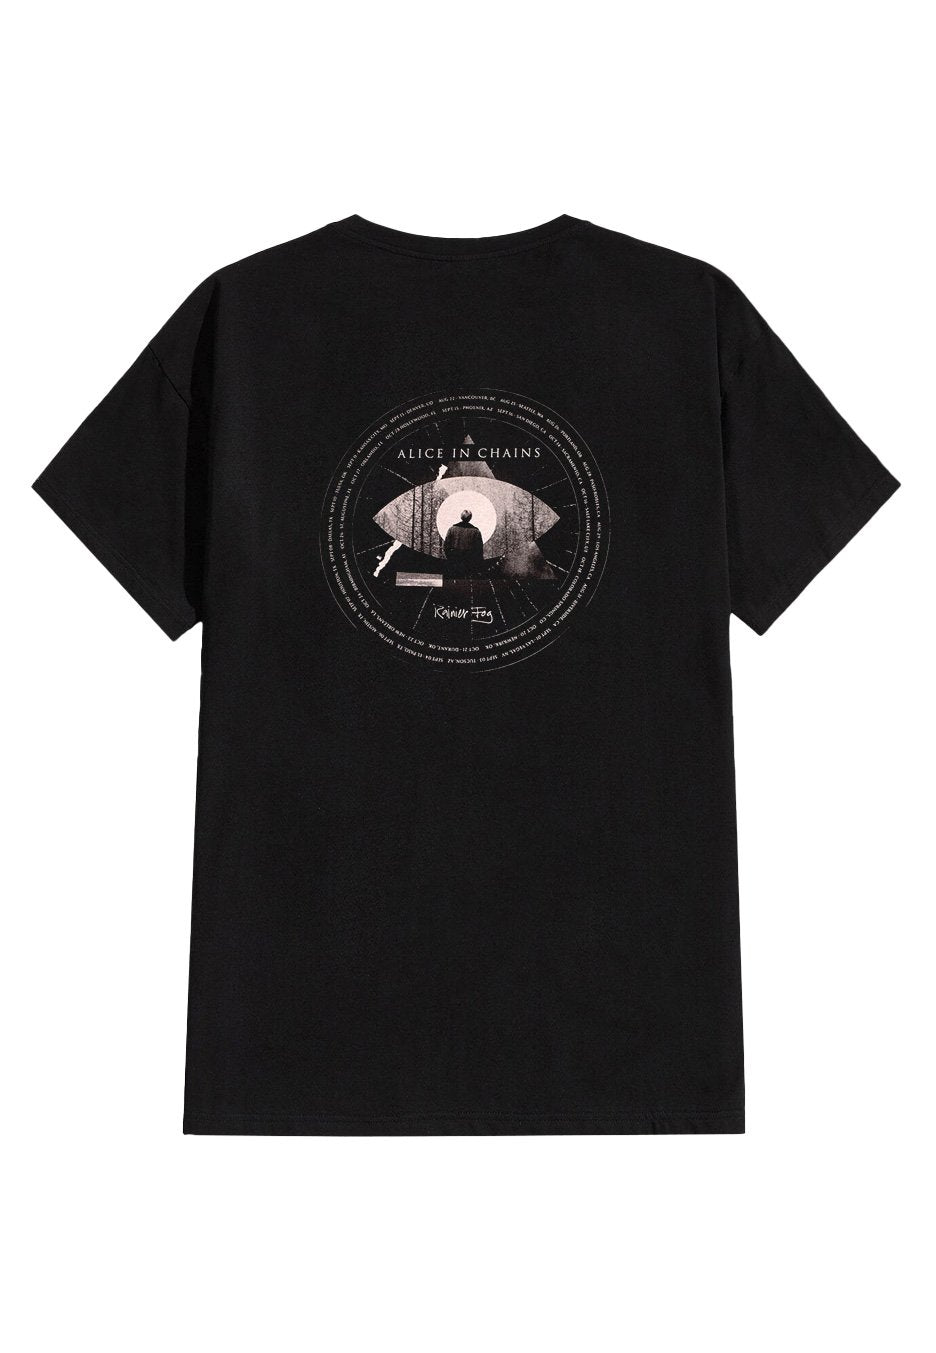 Alice In Chains - Fog Mountain - T-Shirt